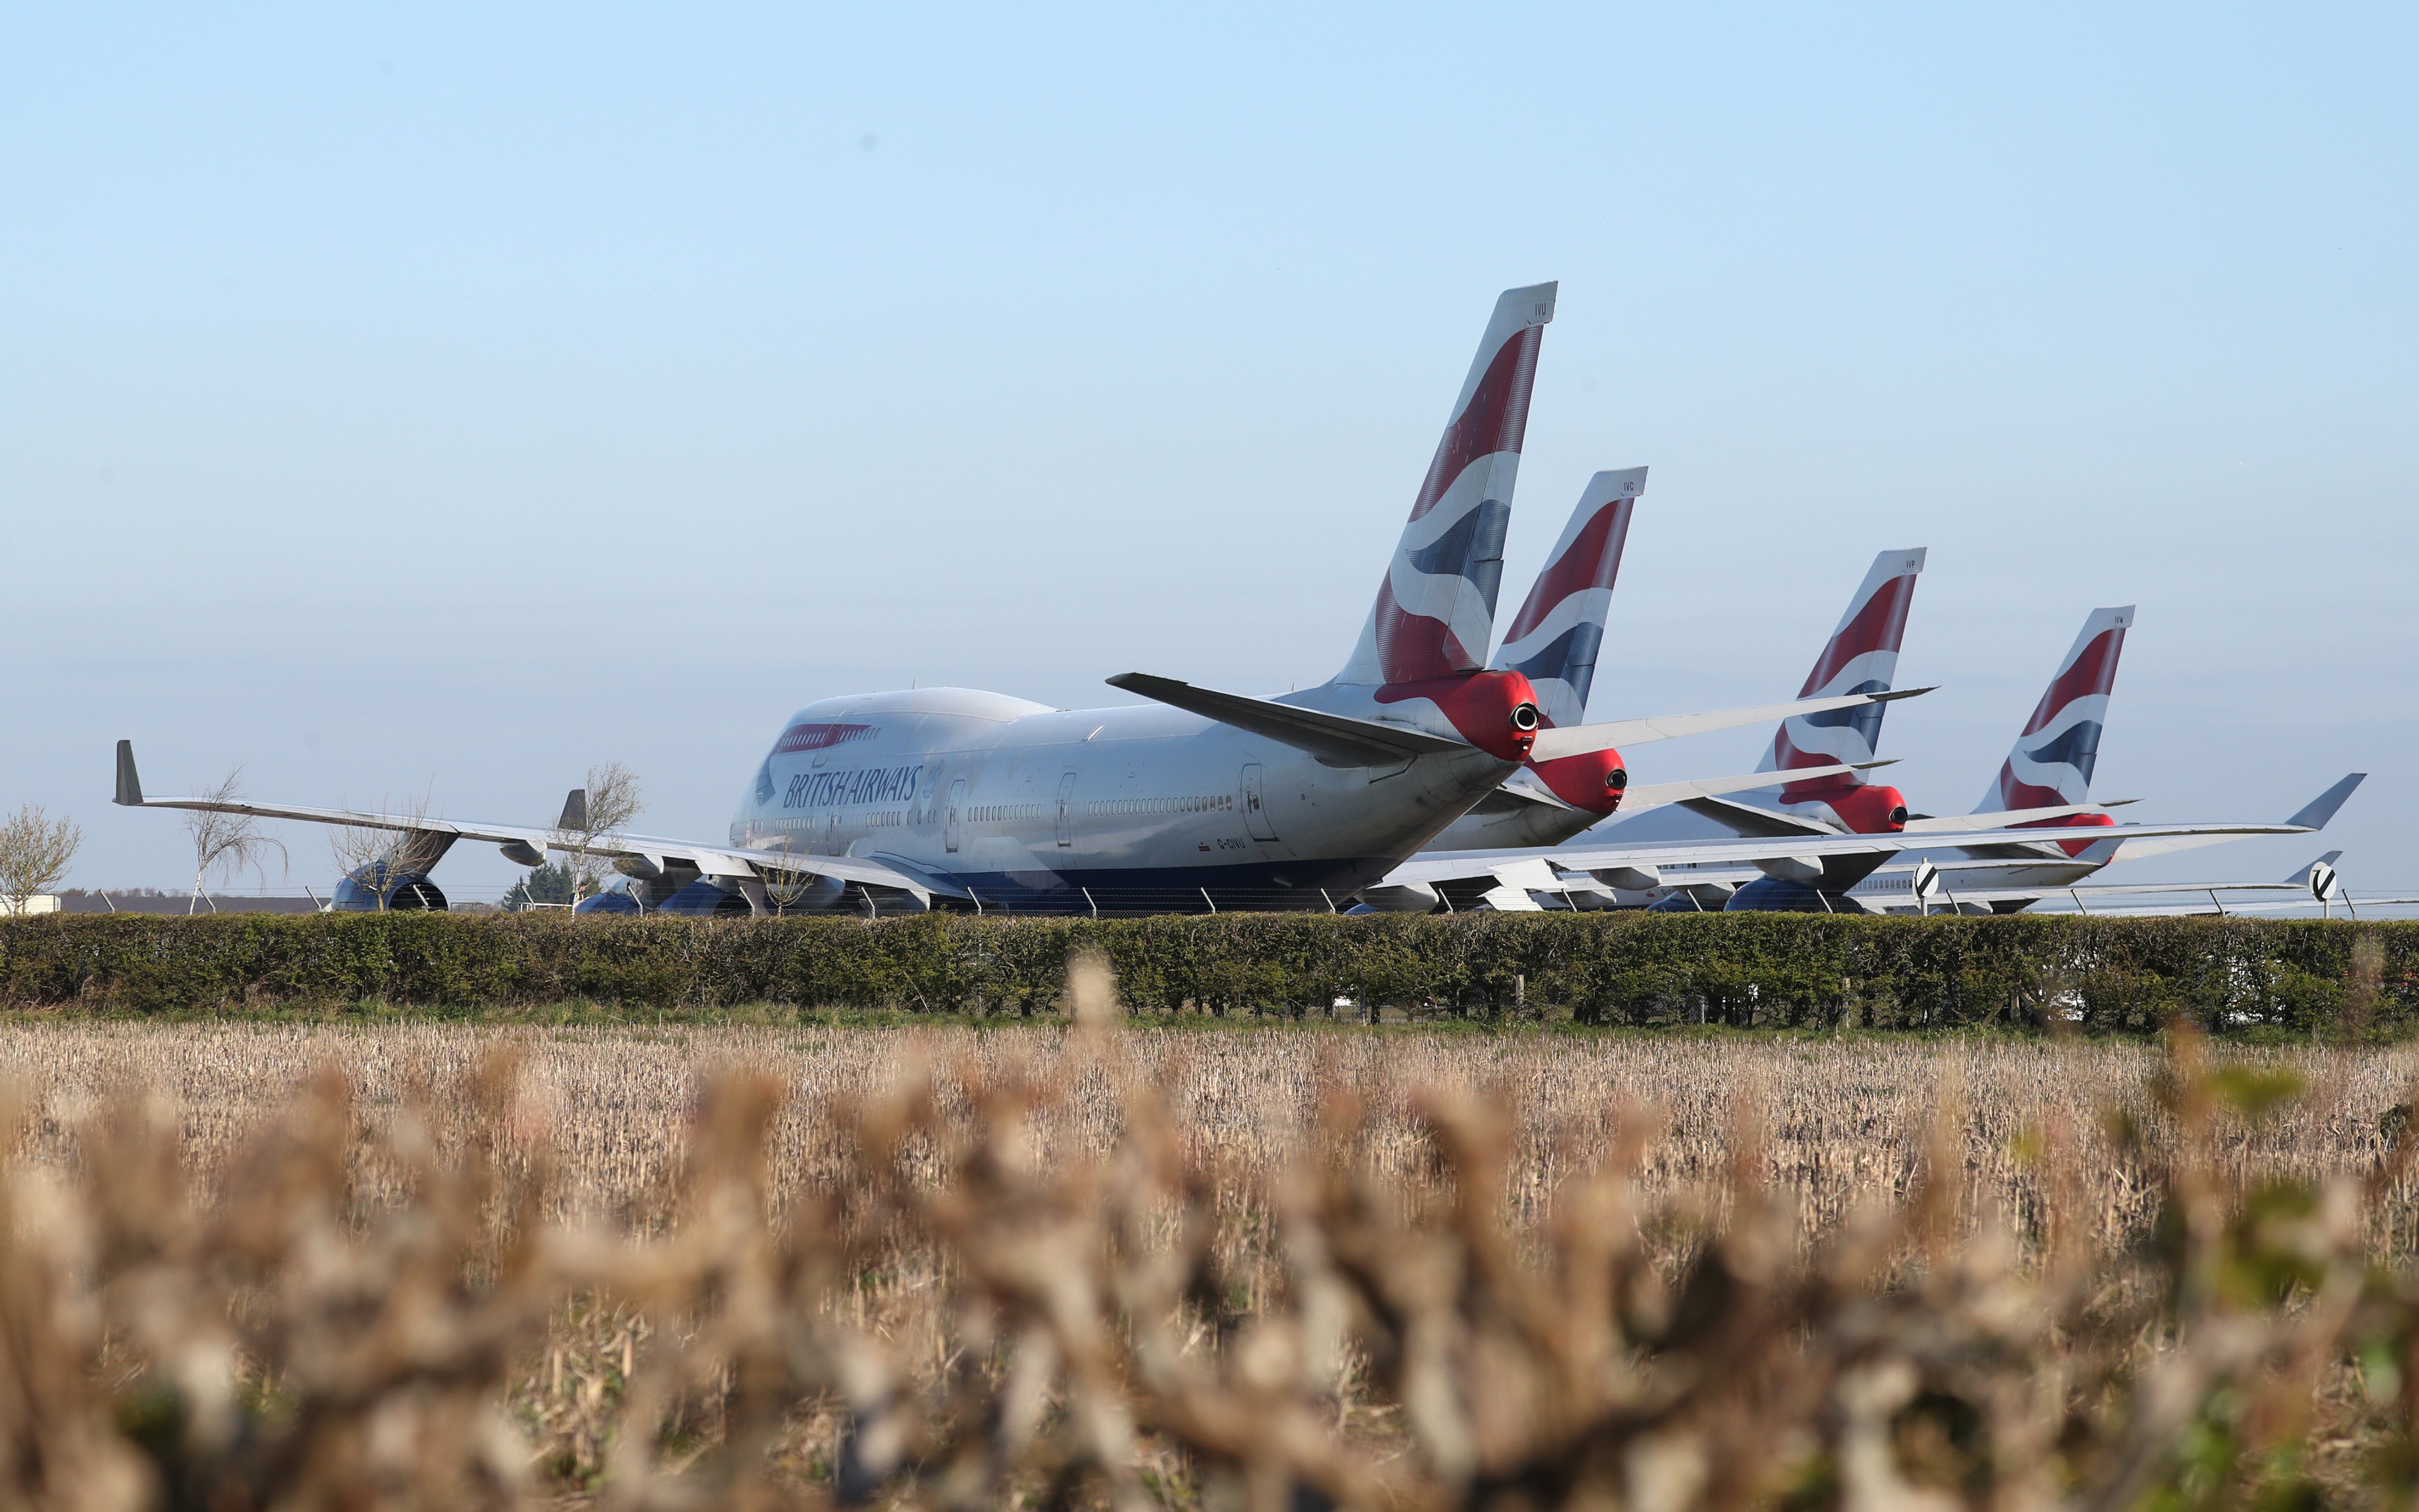 British Airways Boeing 747 aircraft parked at Bournemouth airport on April 1, 2020 after the airline reduced flights amid travel restrictions and a huge drop in demand as a result of the coronavirus pandemic. (Andrew Matthews—PA Images/Getty Images)